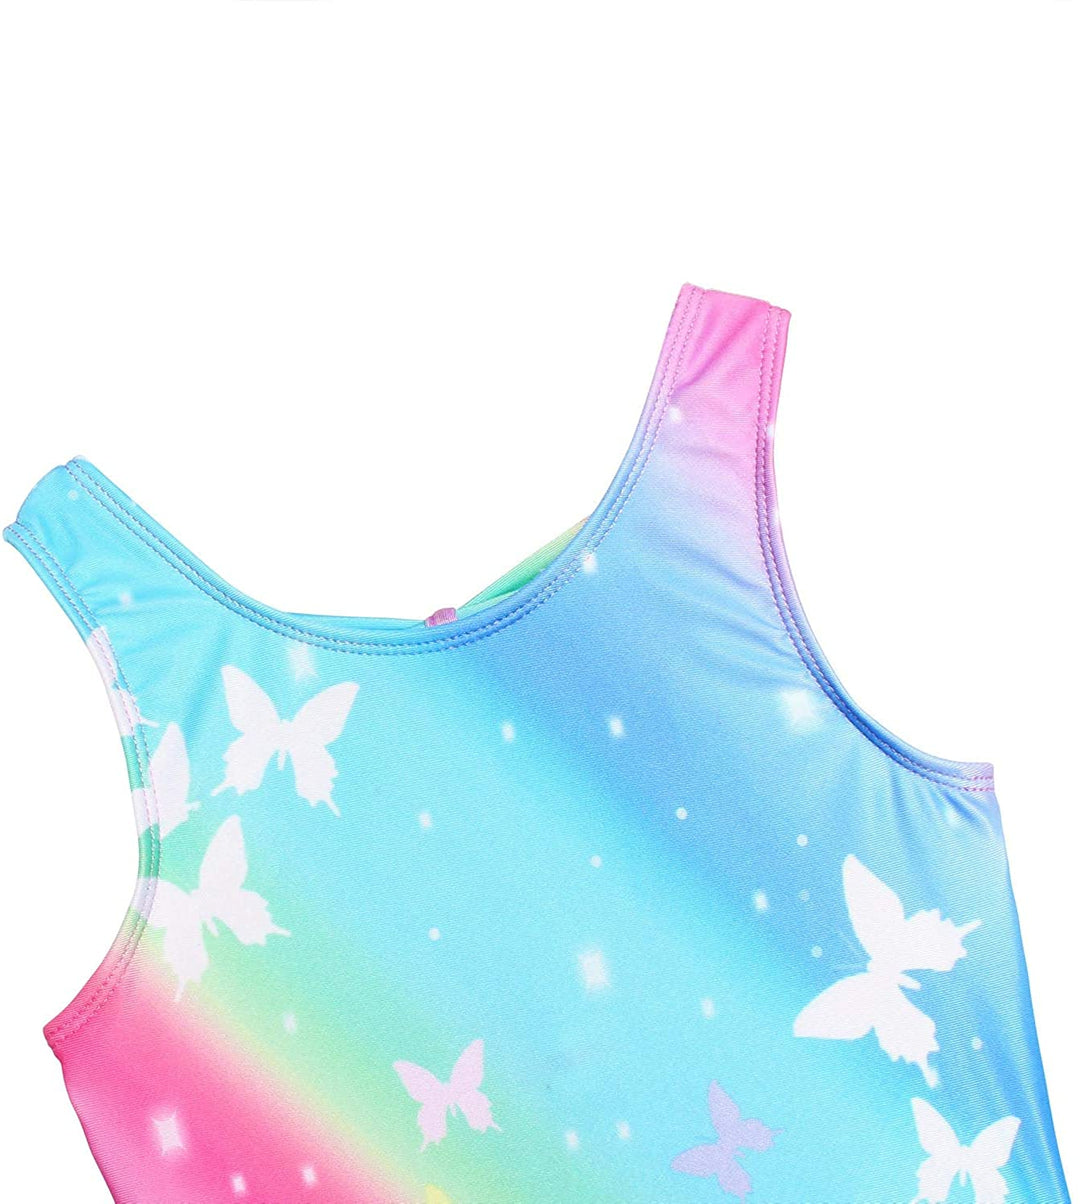 Butterfly Unitard with Shorts One Piece Bodysuit Biketards for Girls - Fabric